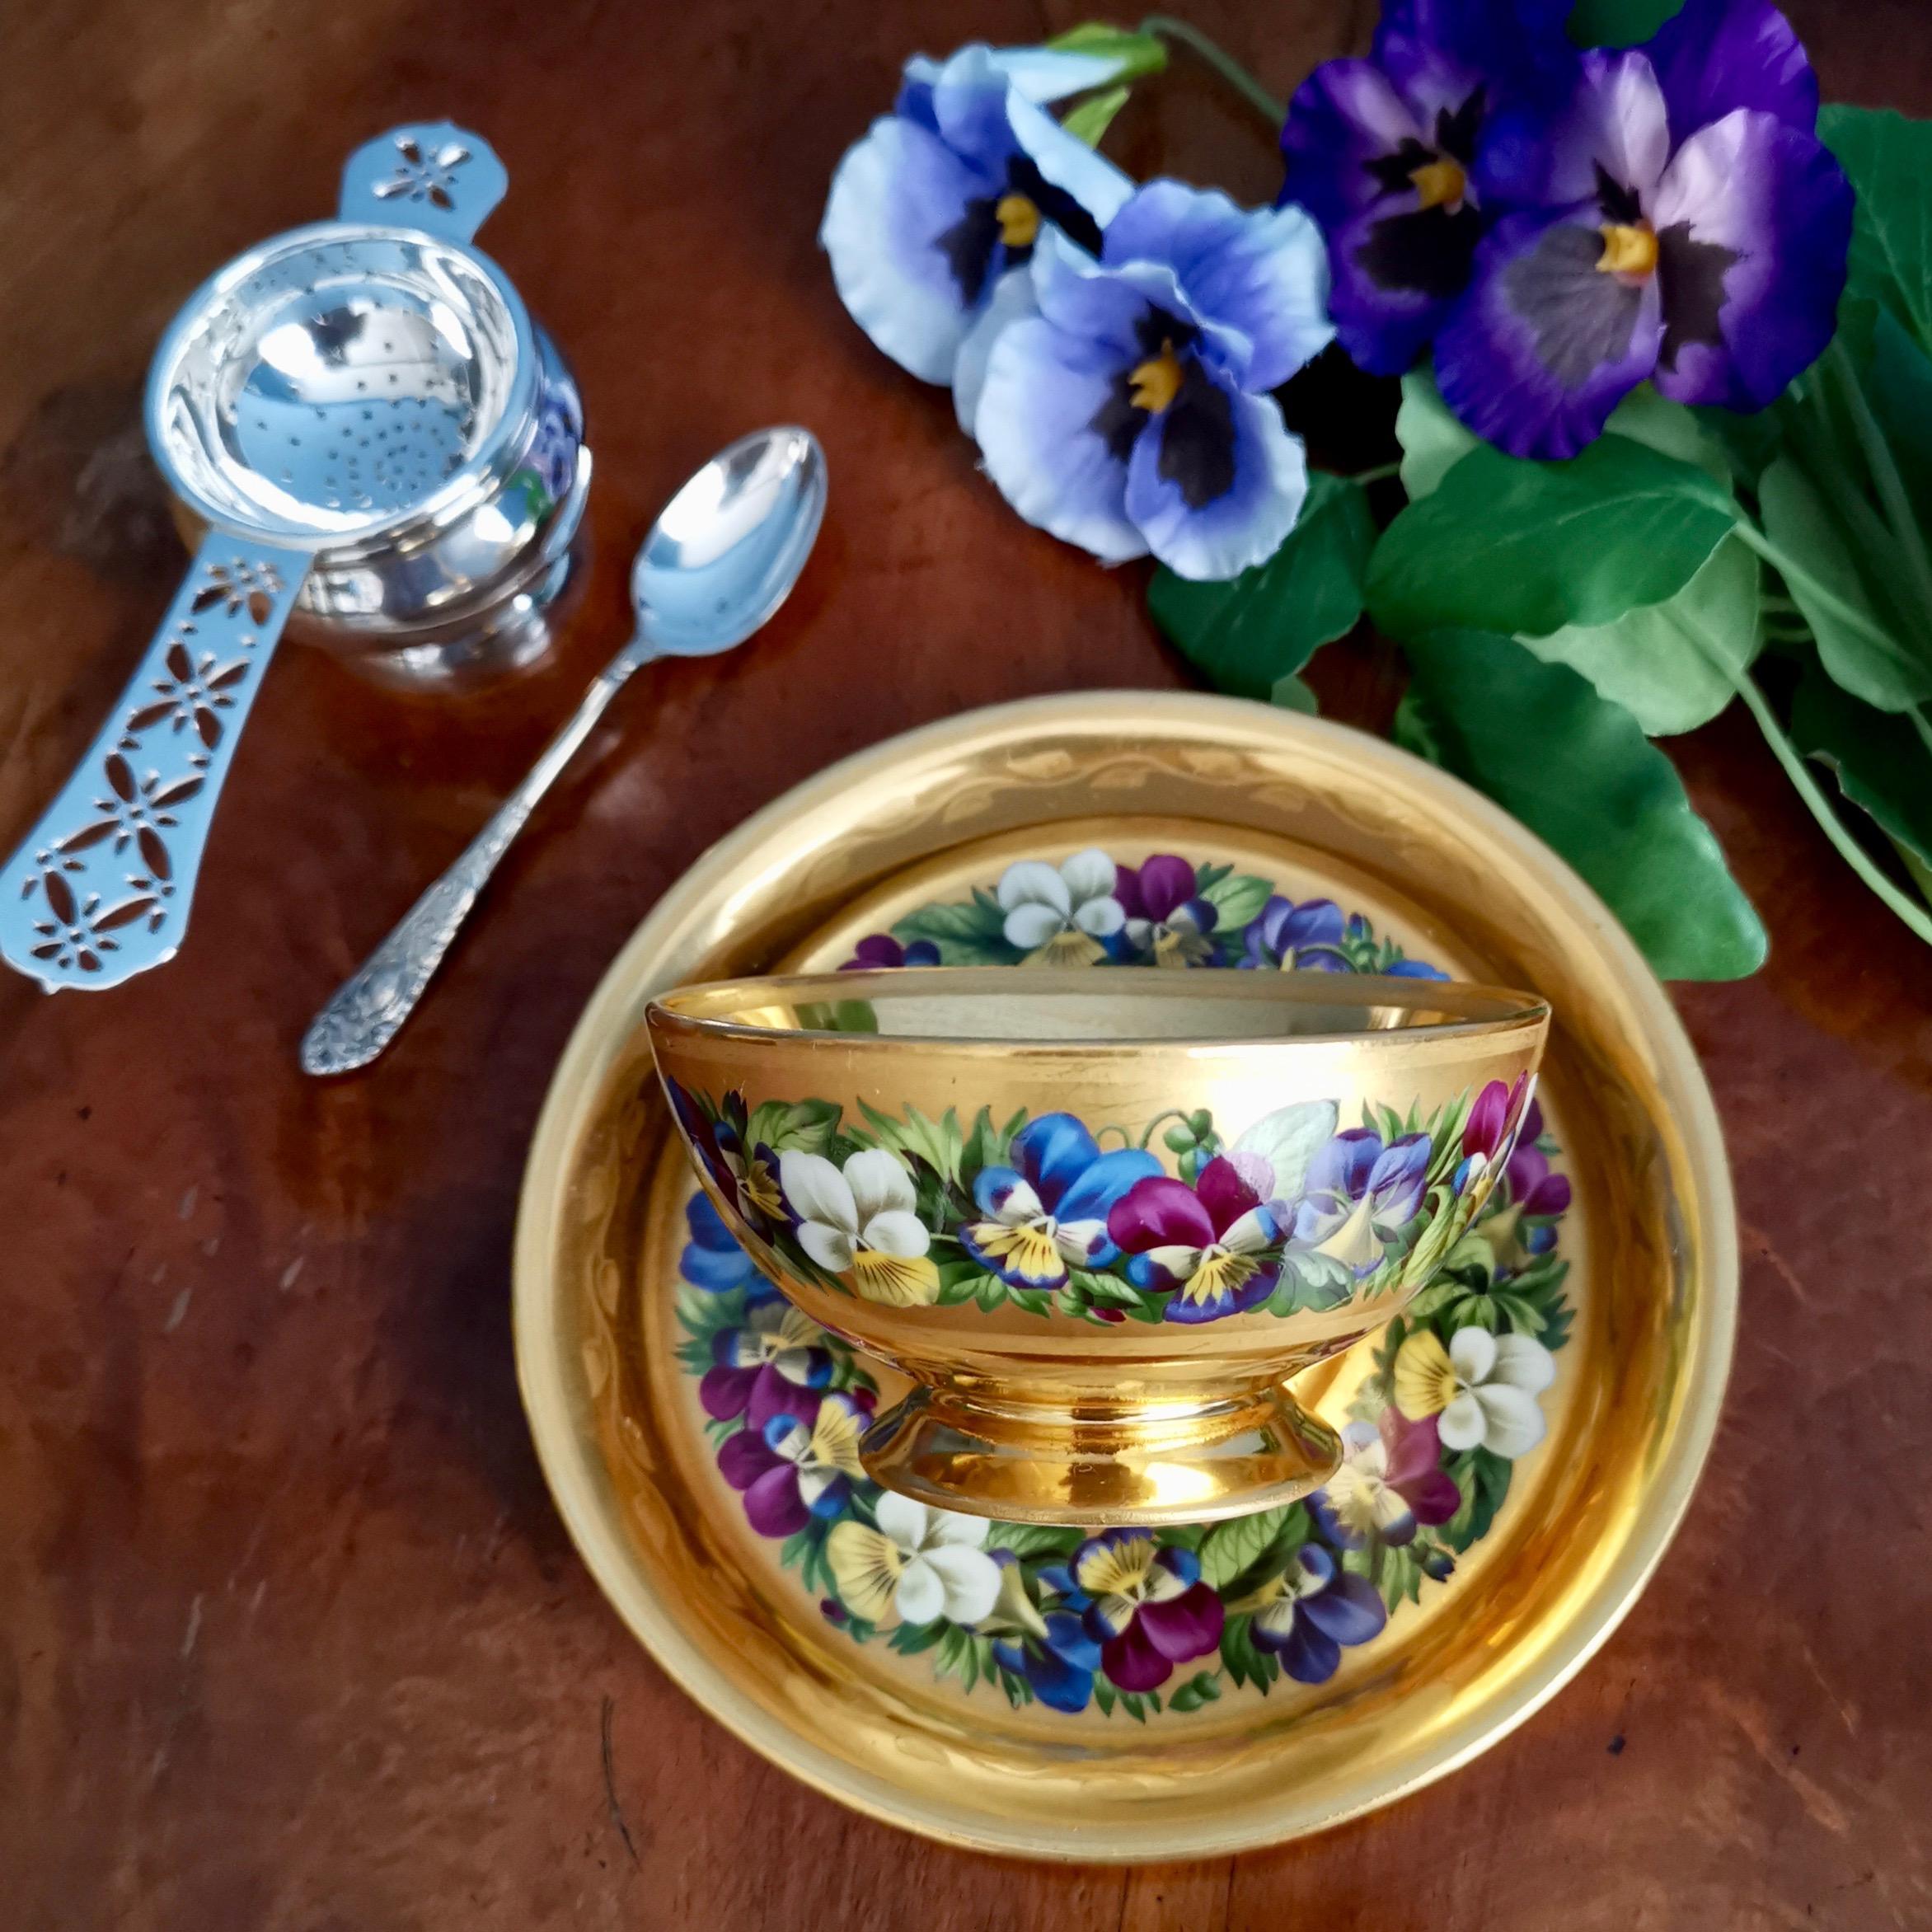 This is a beautiful teacup and saucer made by the Imperial Porcelain Factory in Vienna in 1826. The set has a lavish gilt ground and beautiful bands of pansies painted by Anton Friedl, who was famous for his flower paintings, but particularly his